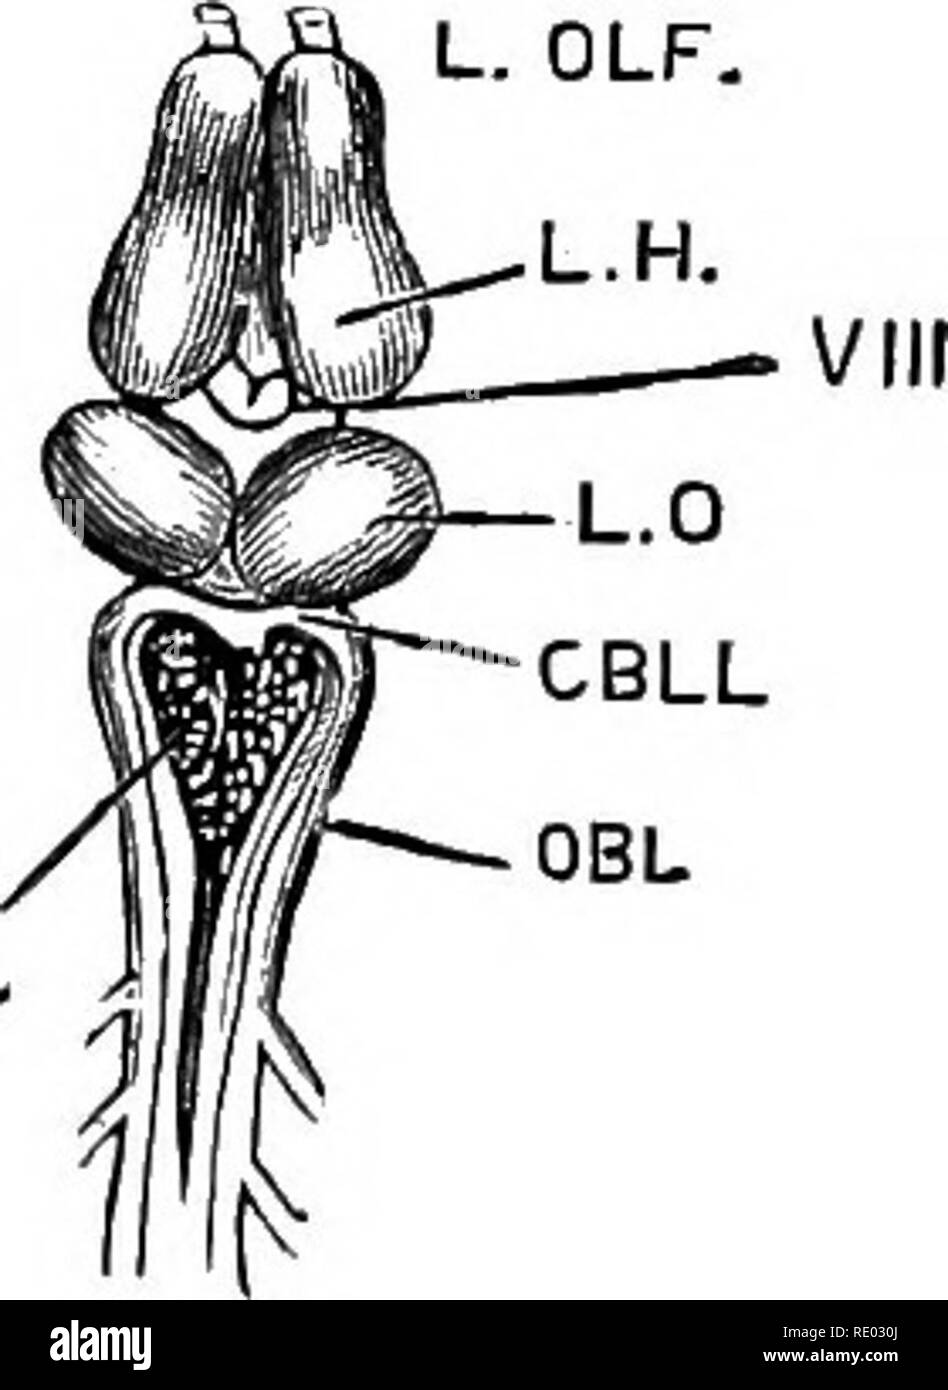 . The physiology of the domestic animals; a text-book for veterinary and medical students and practitioners. Physiology, Comparative; Domestic animals. Fig. 325.—Brain of Perch, after Cuvier. (Rymer Jones.) A, cerebellum; B, cerebrum; C, olfactory ganglion; i, olfactory nerves; D, optic ganglion; G, supplementary lobe; II, transverse fibres in the walla of the cerebral ventricle; N, commissure of the optic nerves; P, Q, R, S, T, U, the third, fourth, fifth, sixth, seventh, and eighth pair of cerebral nerves. RH.. Fro v&gt;4 r FlG' 326.—Brain of Frog Seen from Above. (Niihn,) s»™.',-rT™AIN tAND Stock Photo